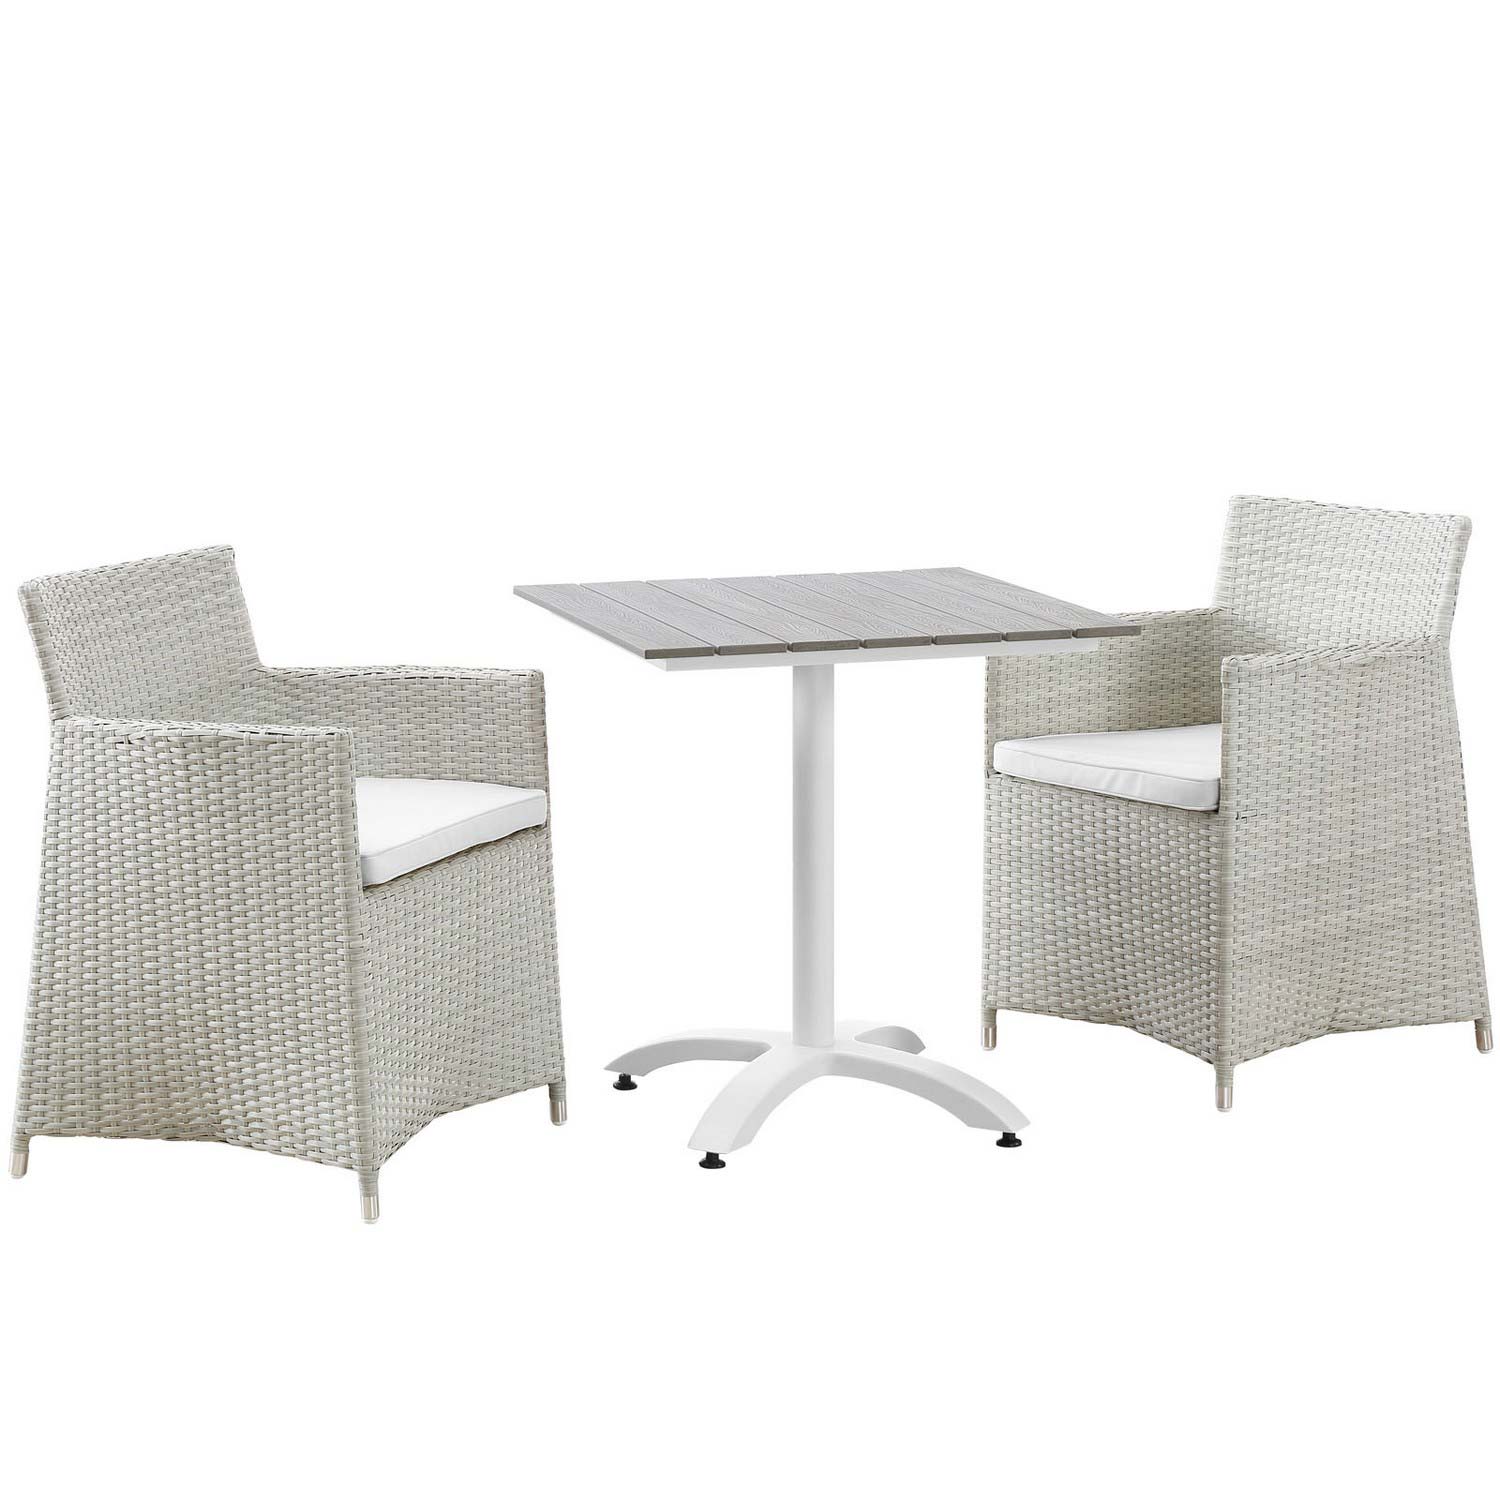 Modway Junction 3 Piece Outdoor Patio Dining Set - Gray/White